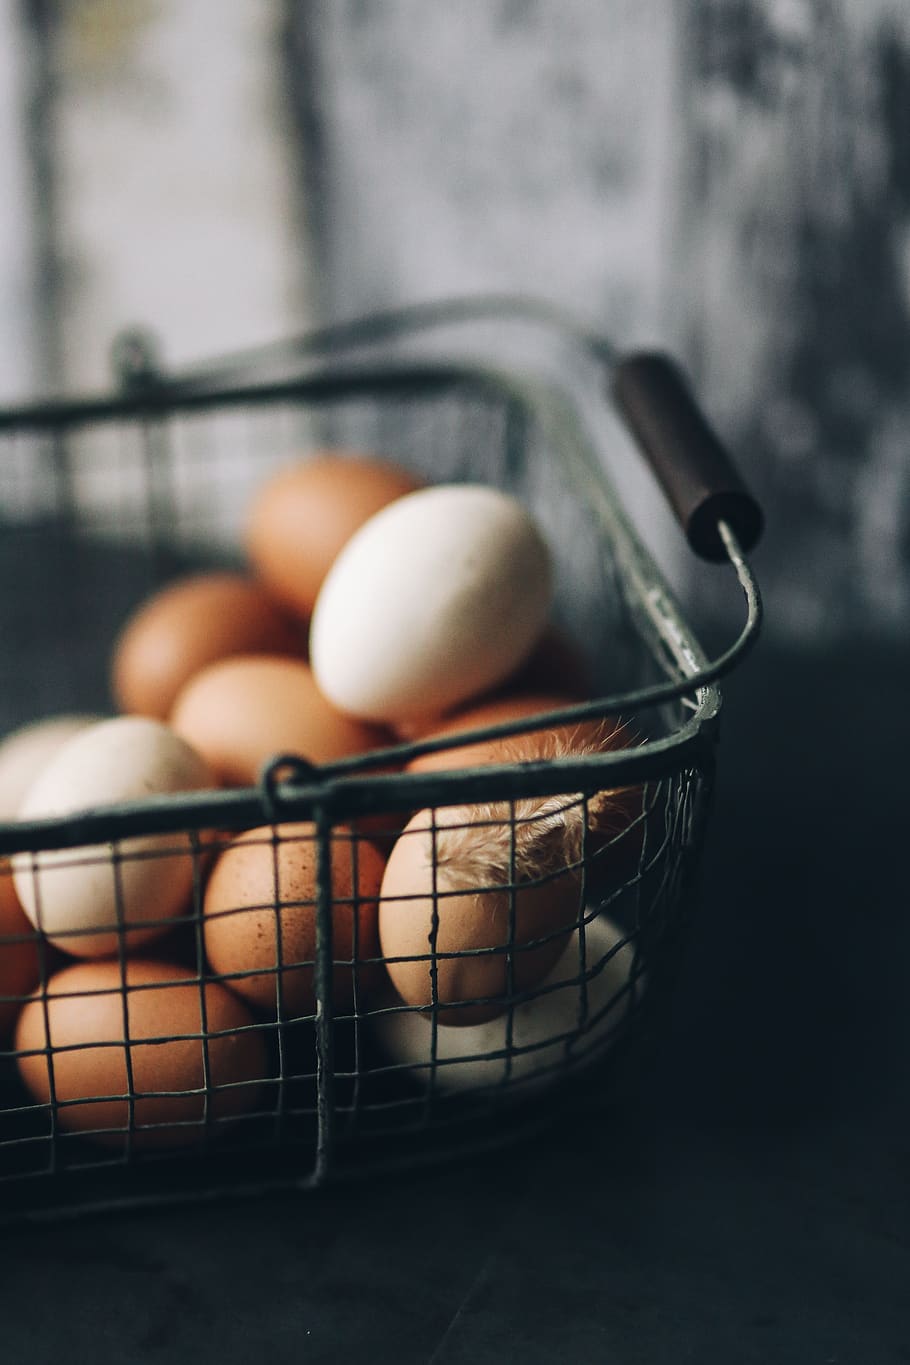 basket, eggs, wire, Metal, food and drink, egg, food, still life, healthy eating, container